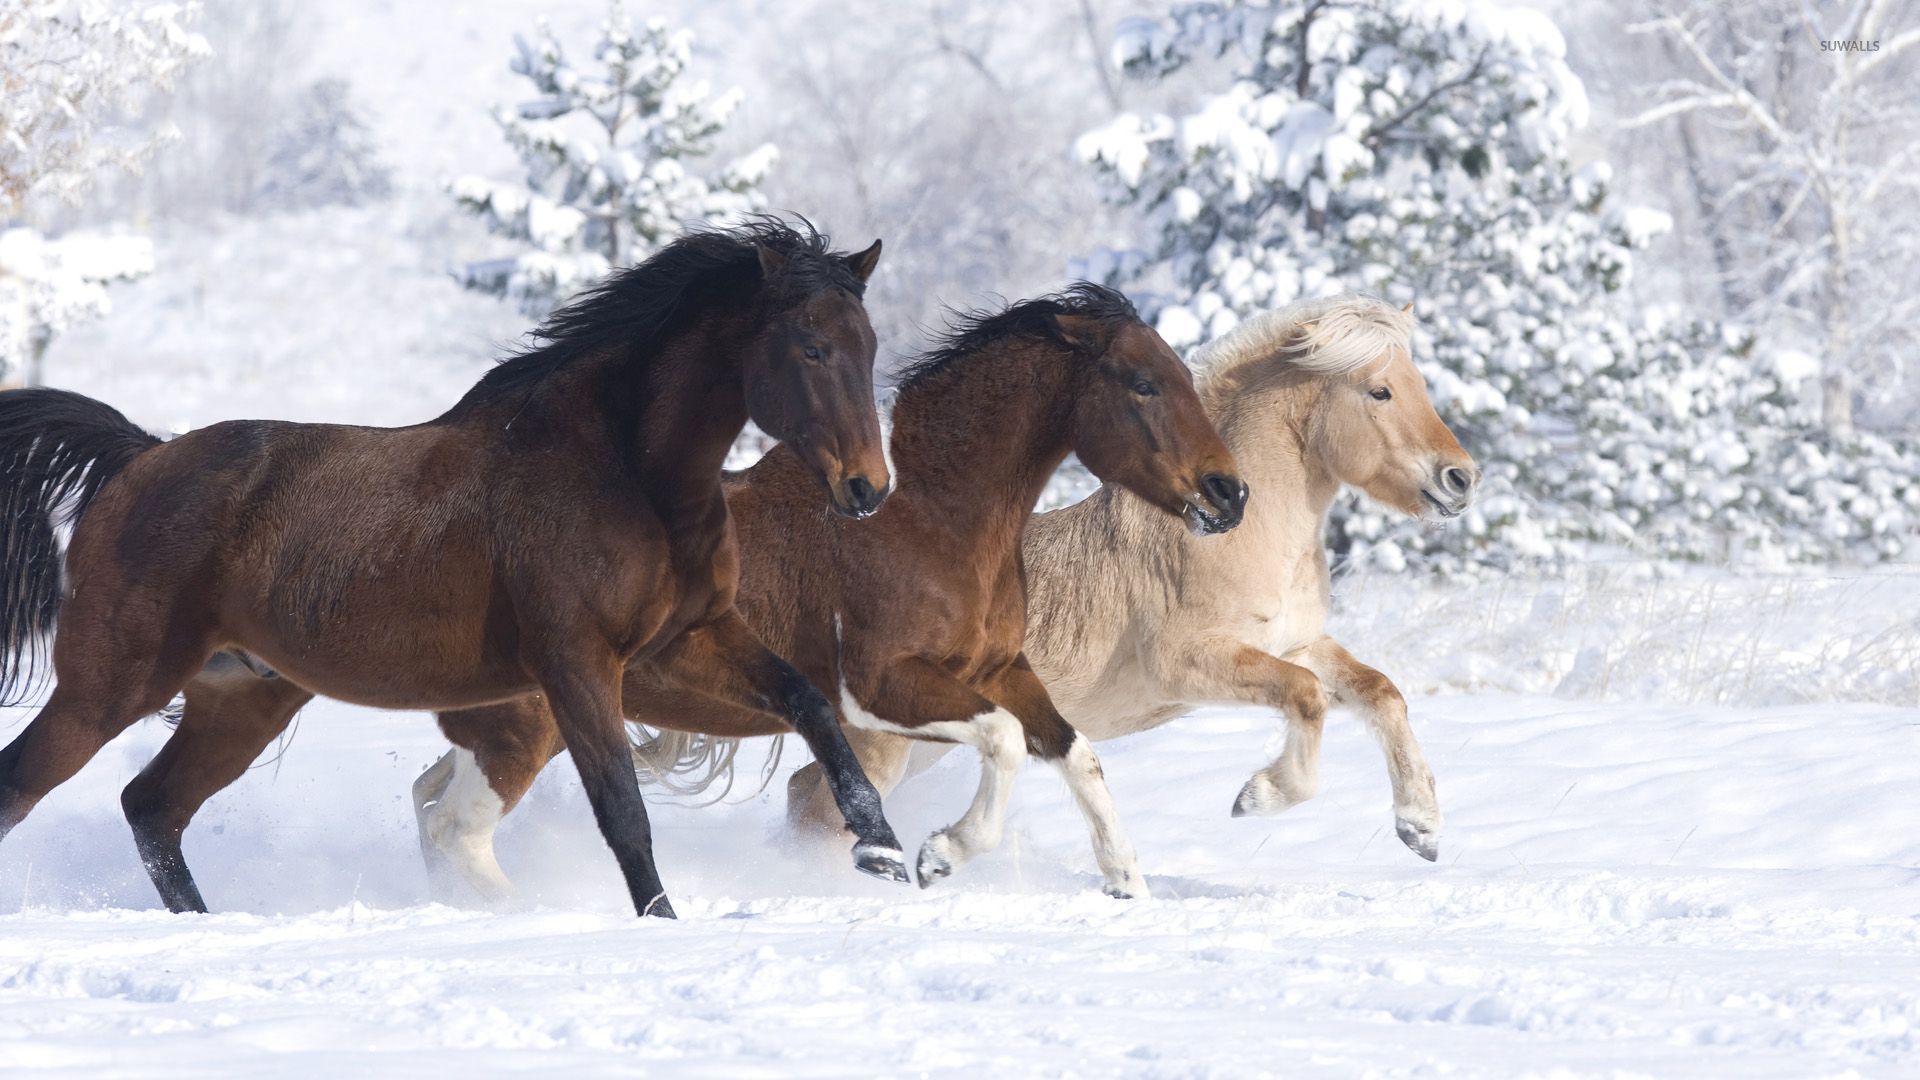 Winter Scenery With Horses - HD Wallpaper 